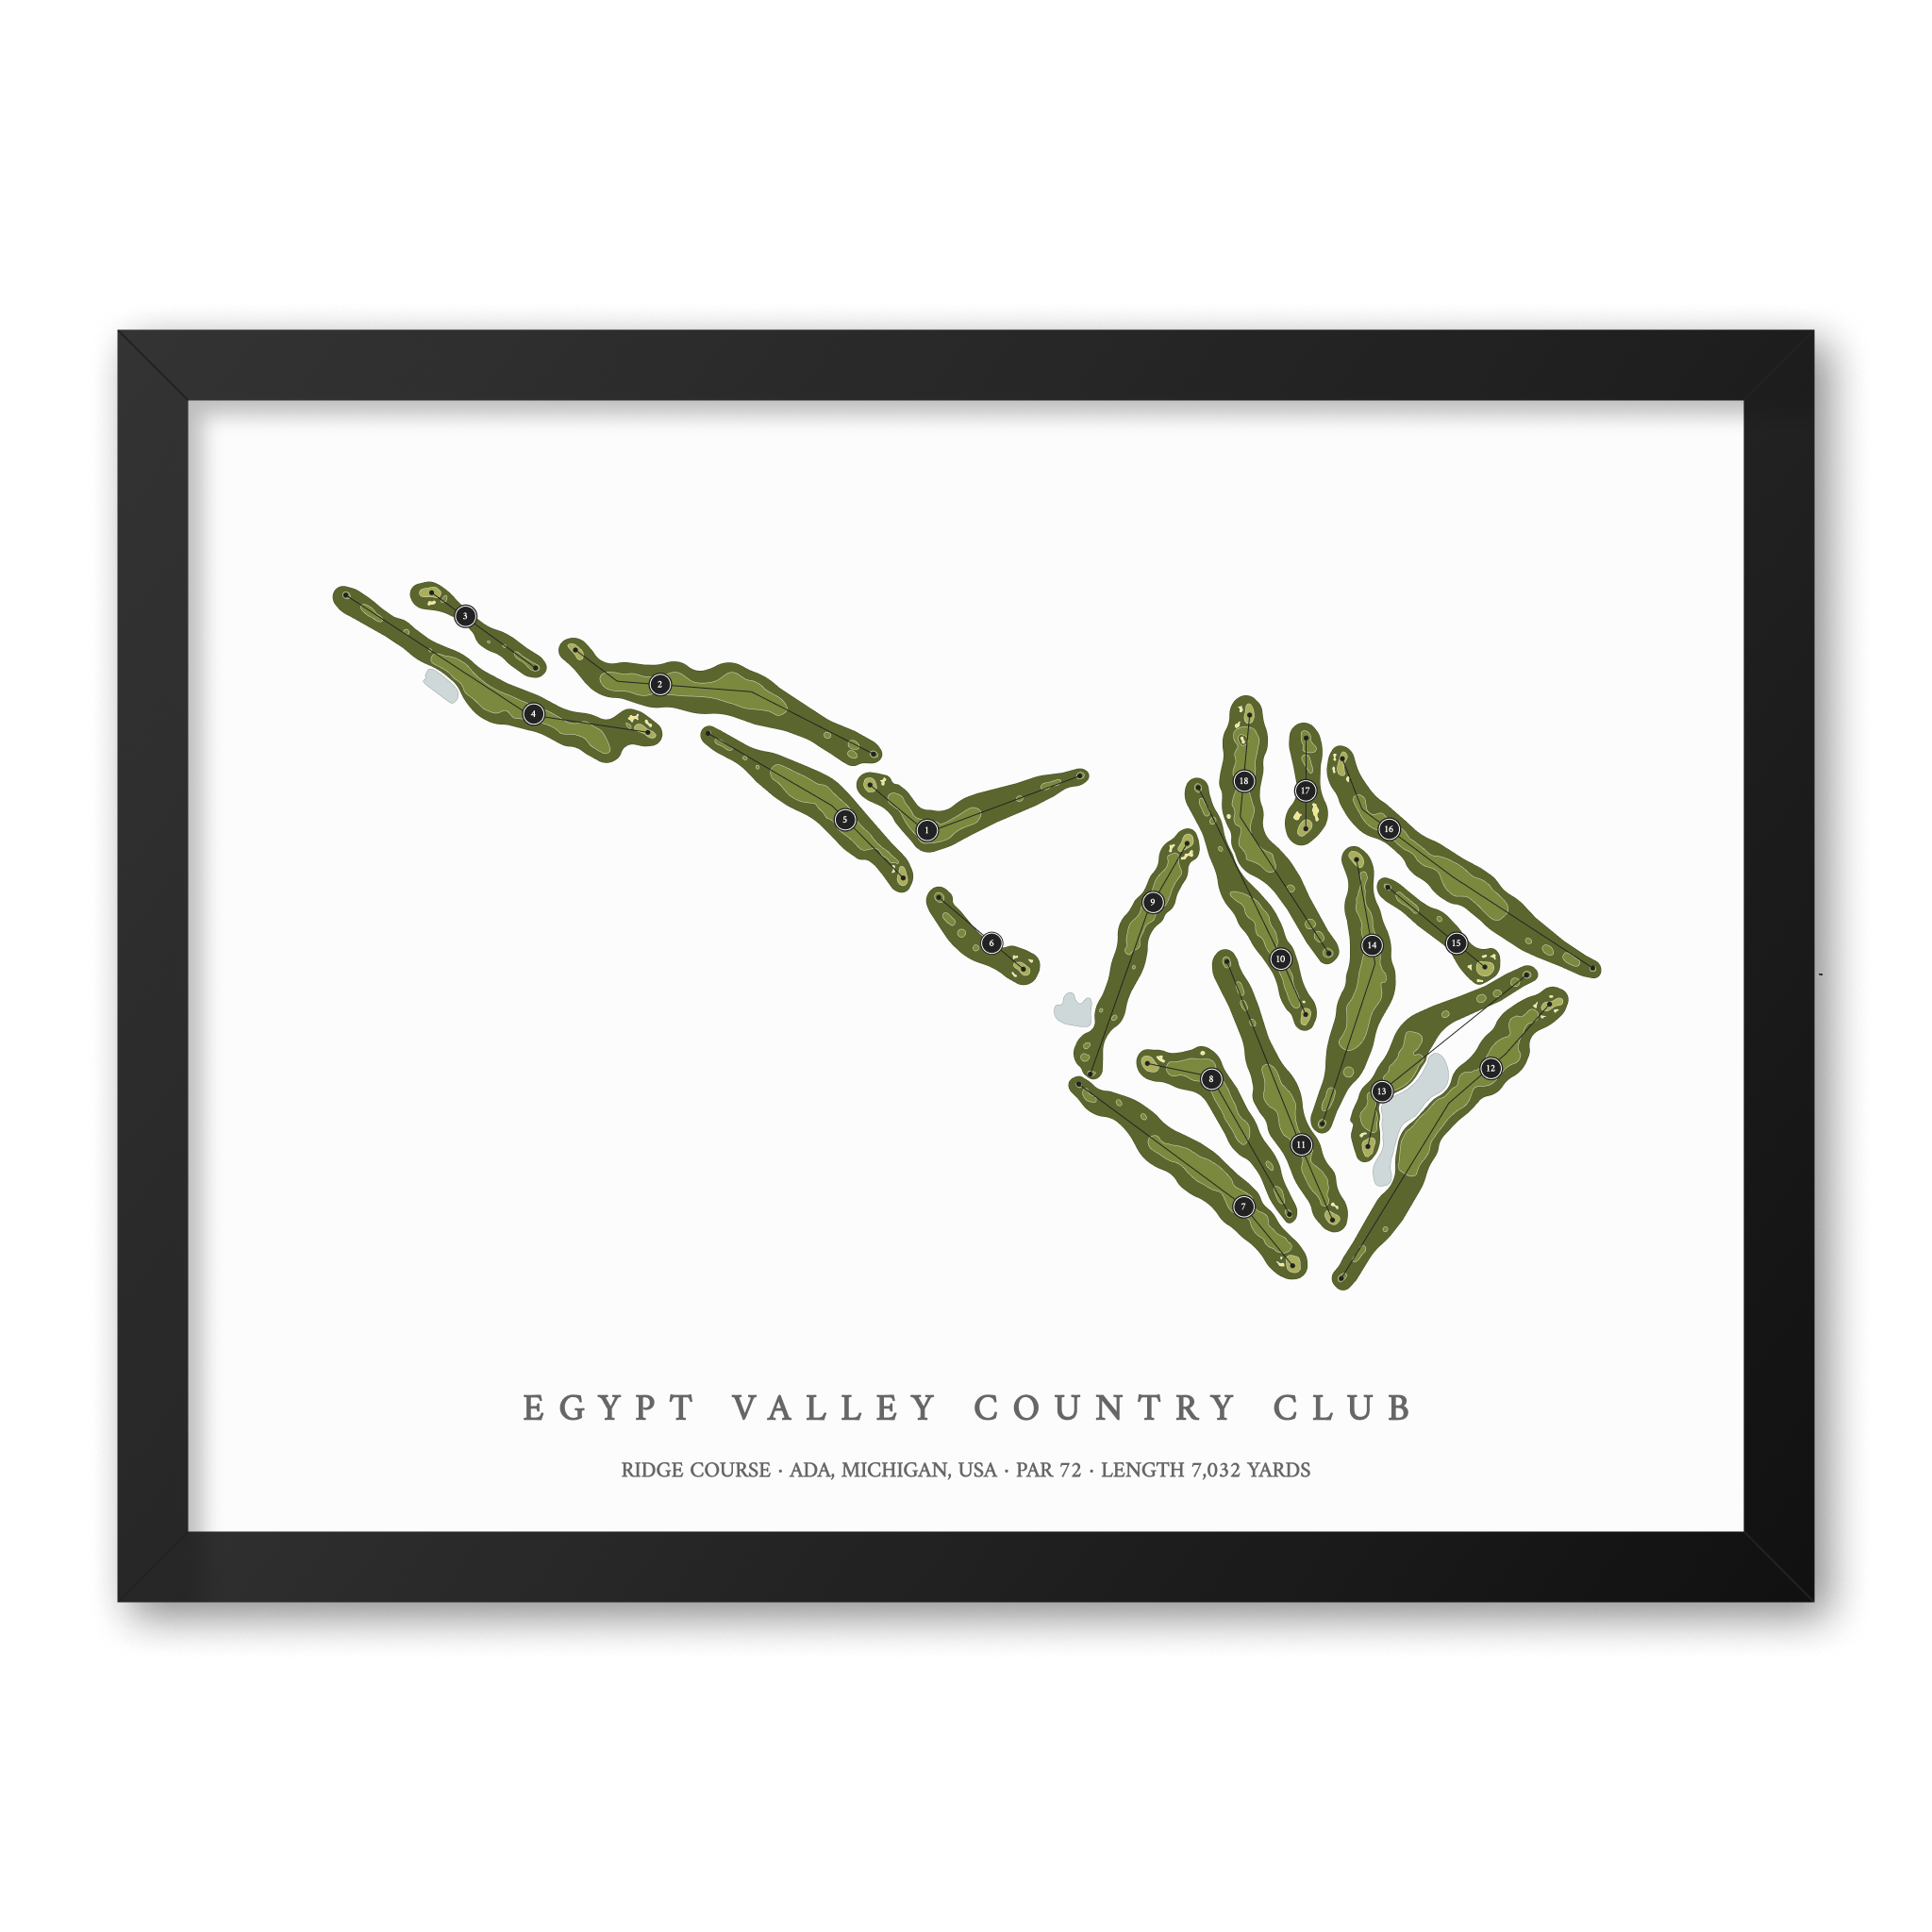 Egypt Valley Country Club - Ridge Course| Golf Course Print | Black Frame With Hole Numbers #hole numbers_yes